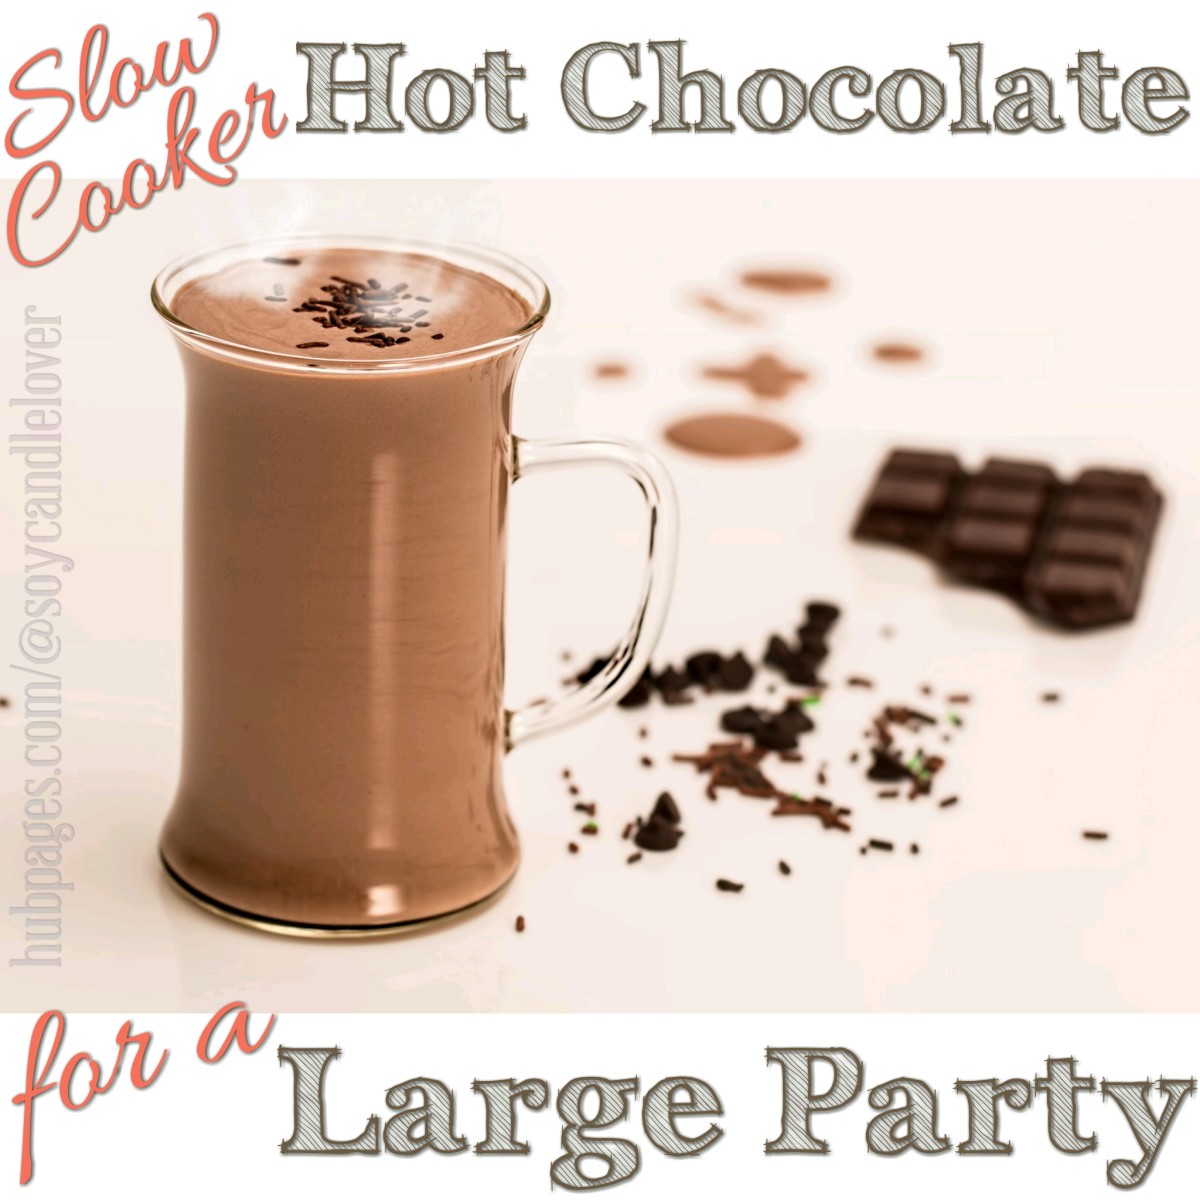 Make Hot Chocolate for Large Party in a Slow Cooker